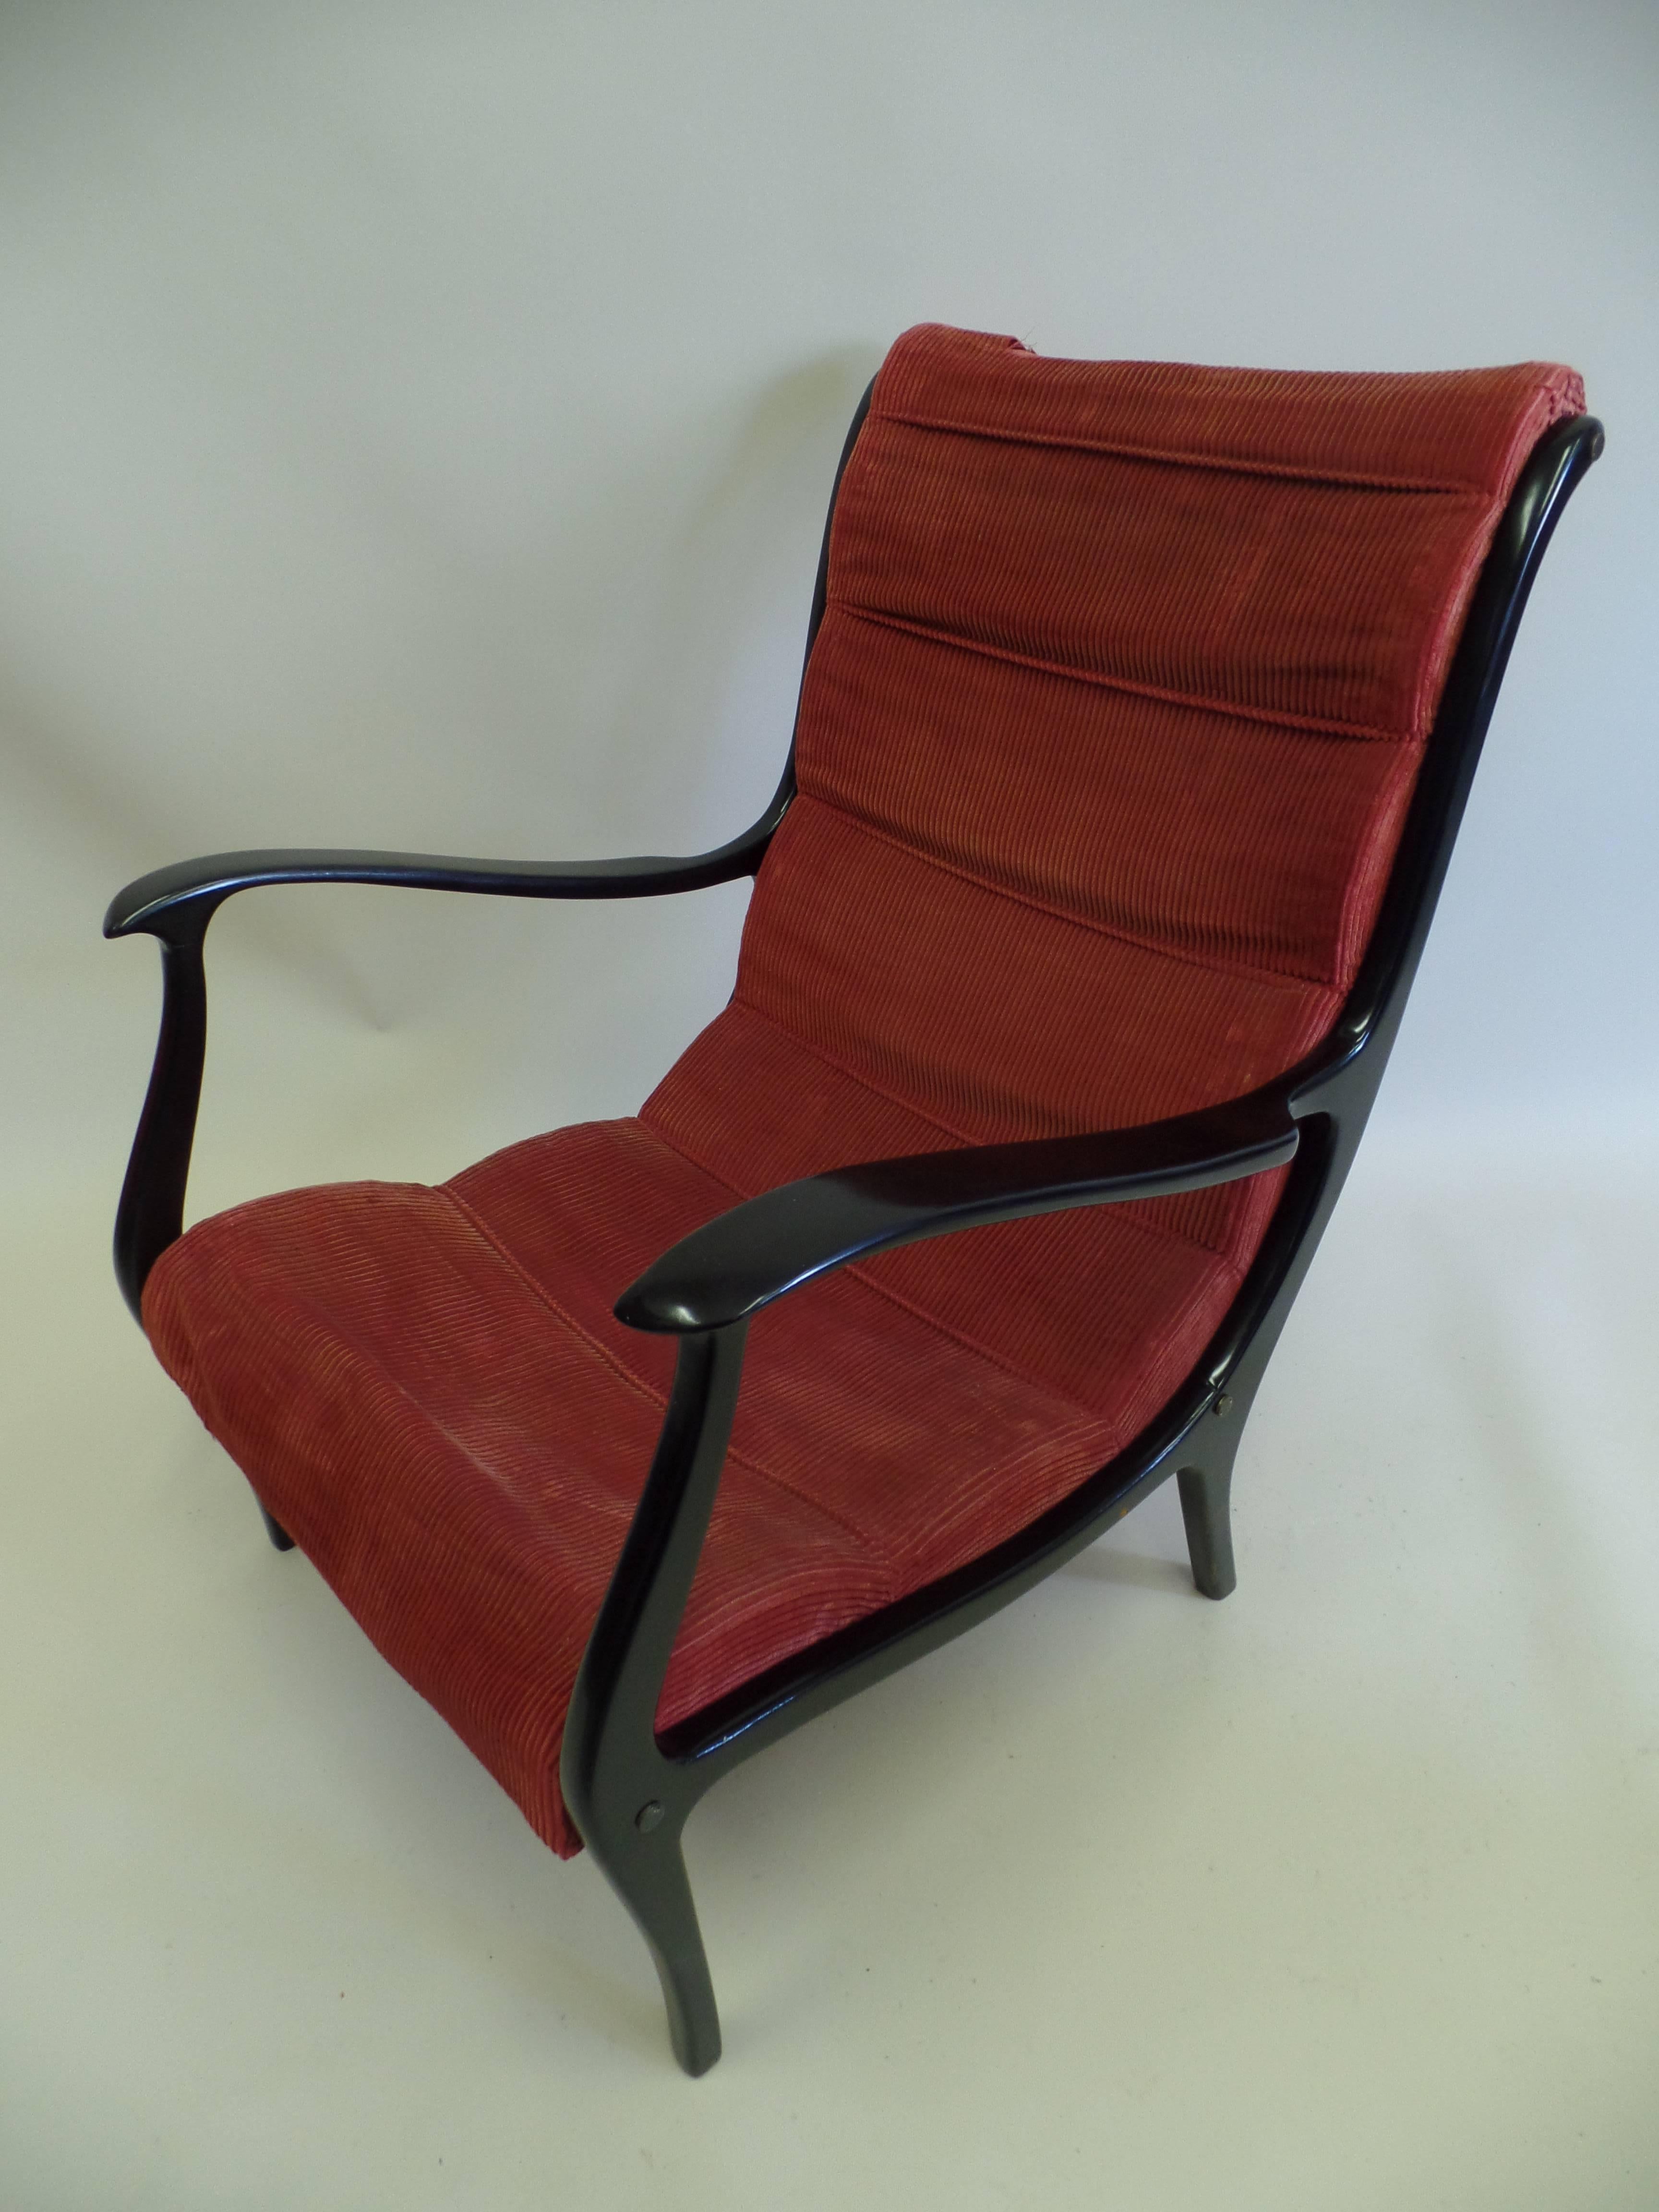 An elegant pair of Italian Mid-Century Modern Neoclassical lounge chairs or Armchairs in the style of Gio Ponti. The pieces are in a sculptural form with smooth flowing lines and refined detailing. The lines are sensuous and the dark hard wood